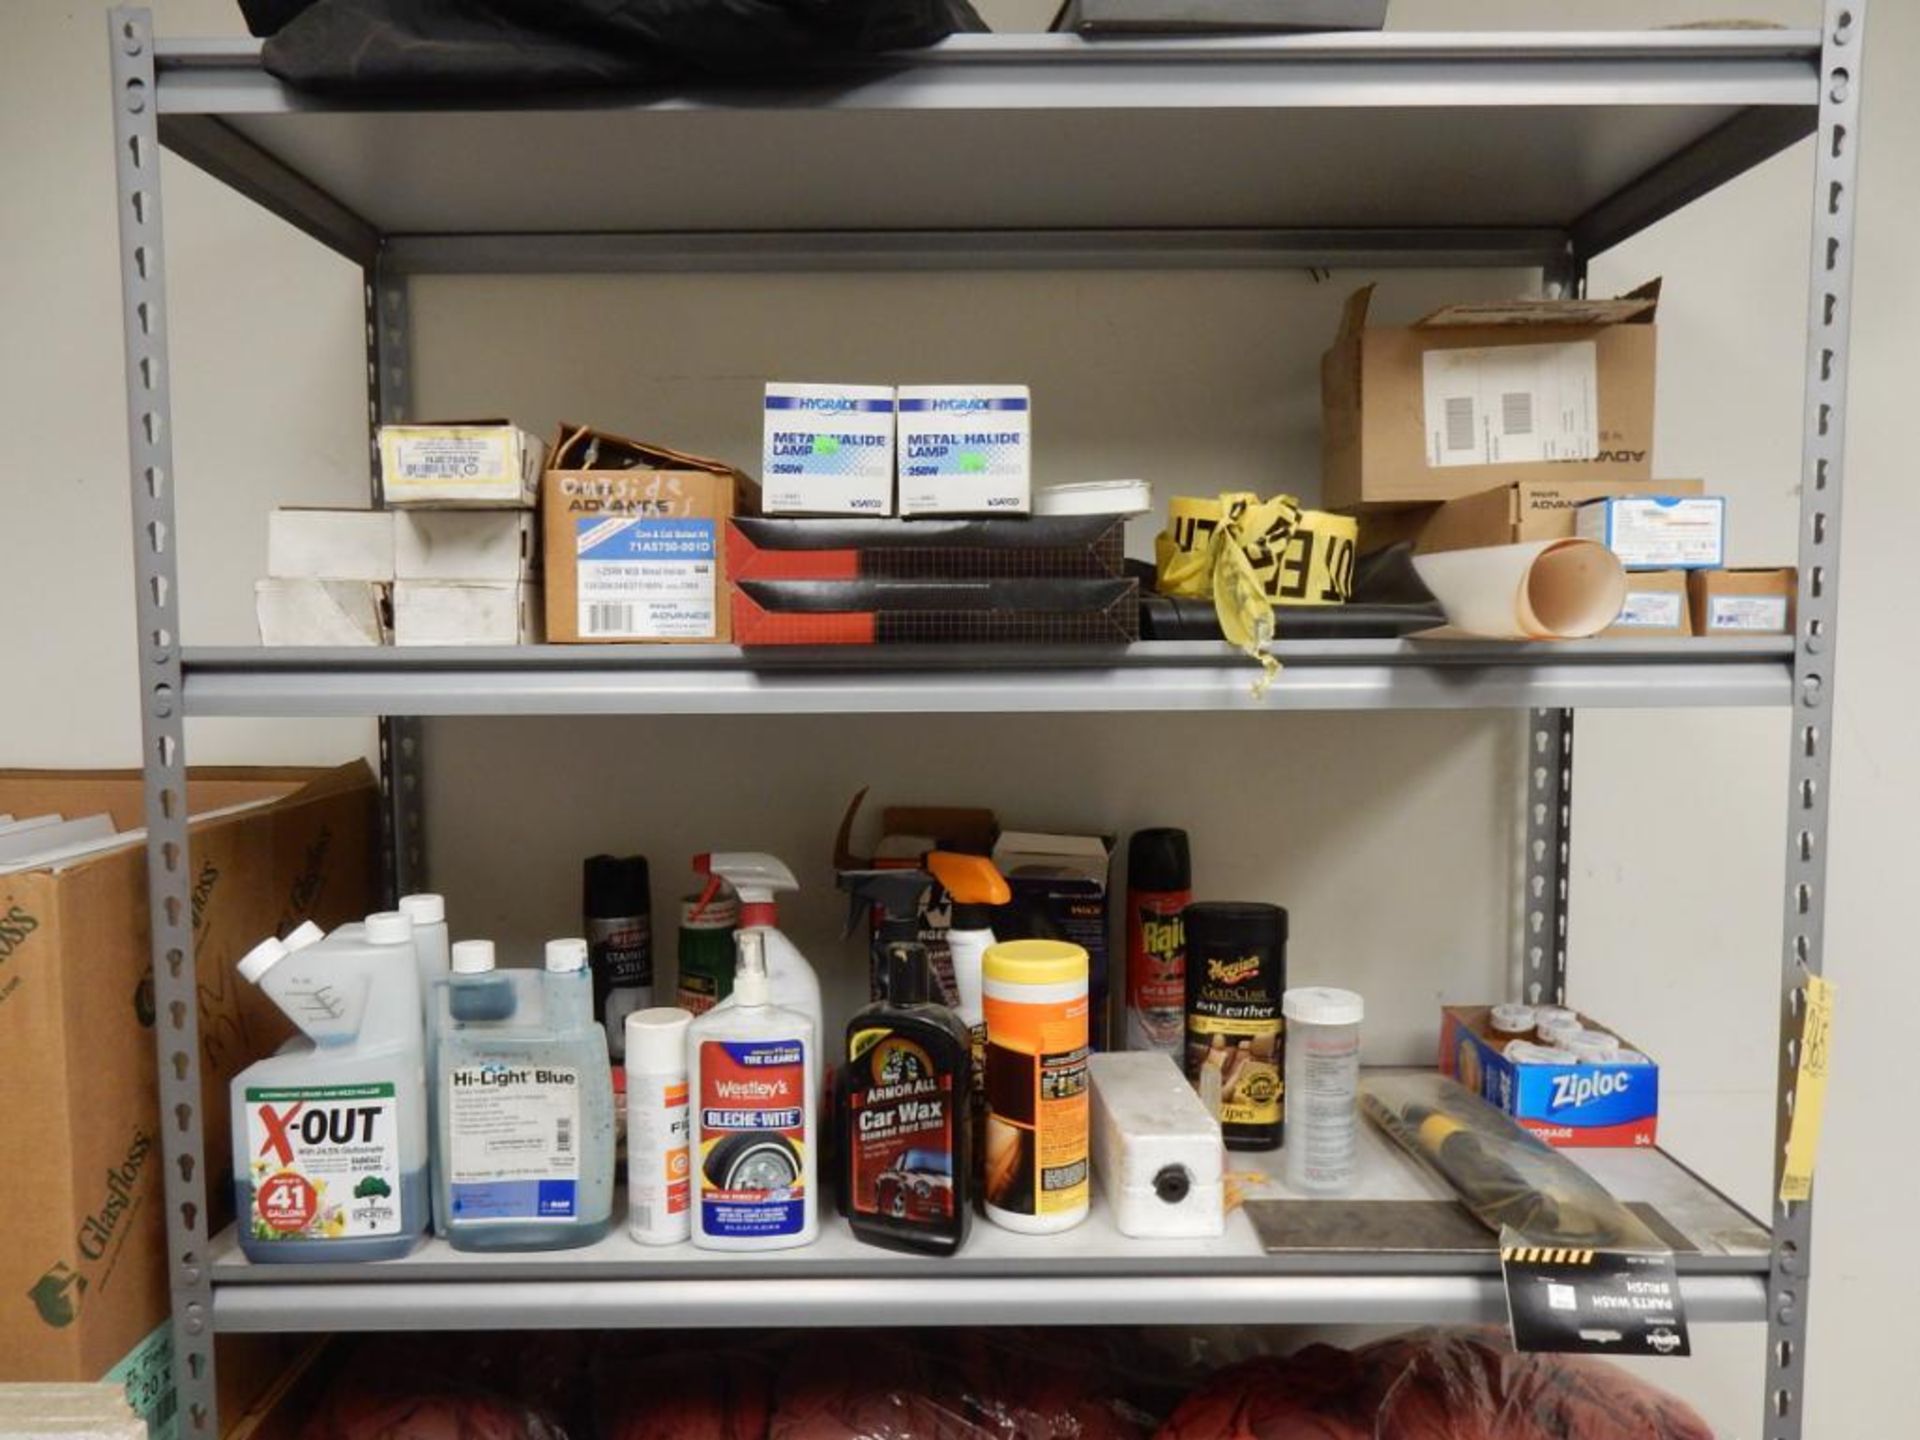 PROCEED TO OFFICE AREA: SHELF W/CONTENTS - RAGS, CLEANERS, ETC. - Image 2 of 2